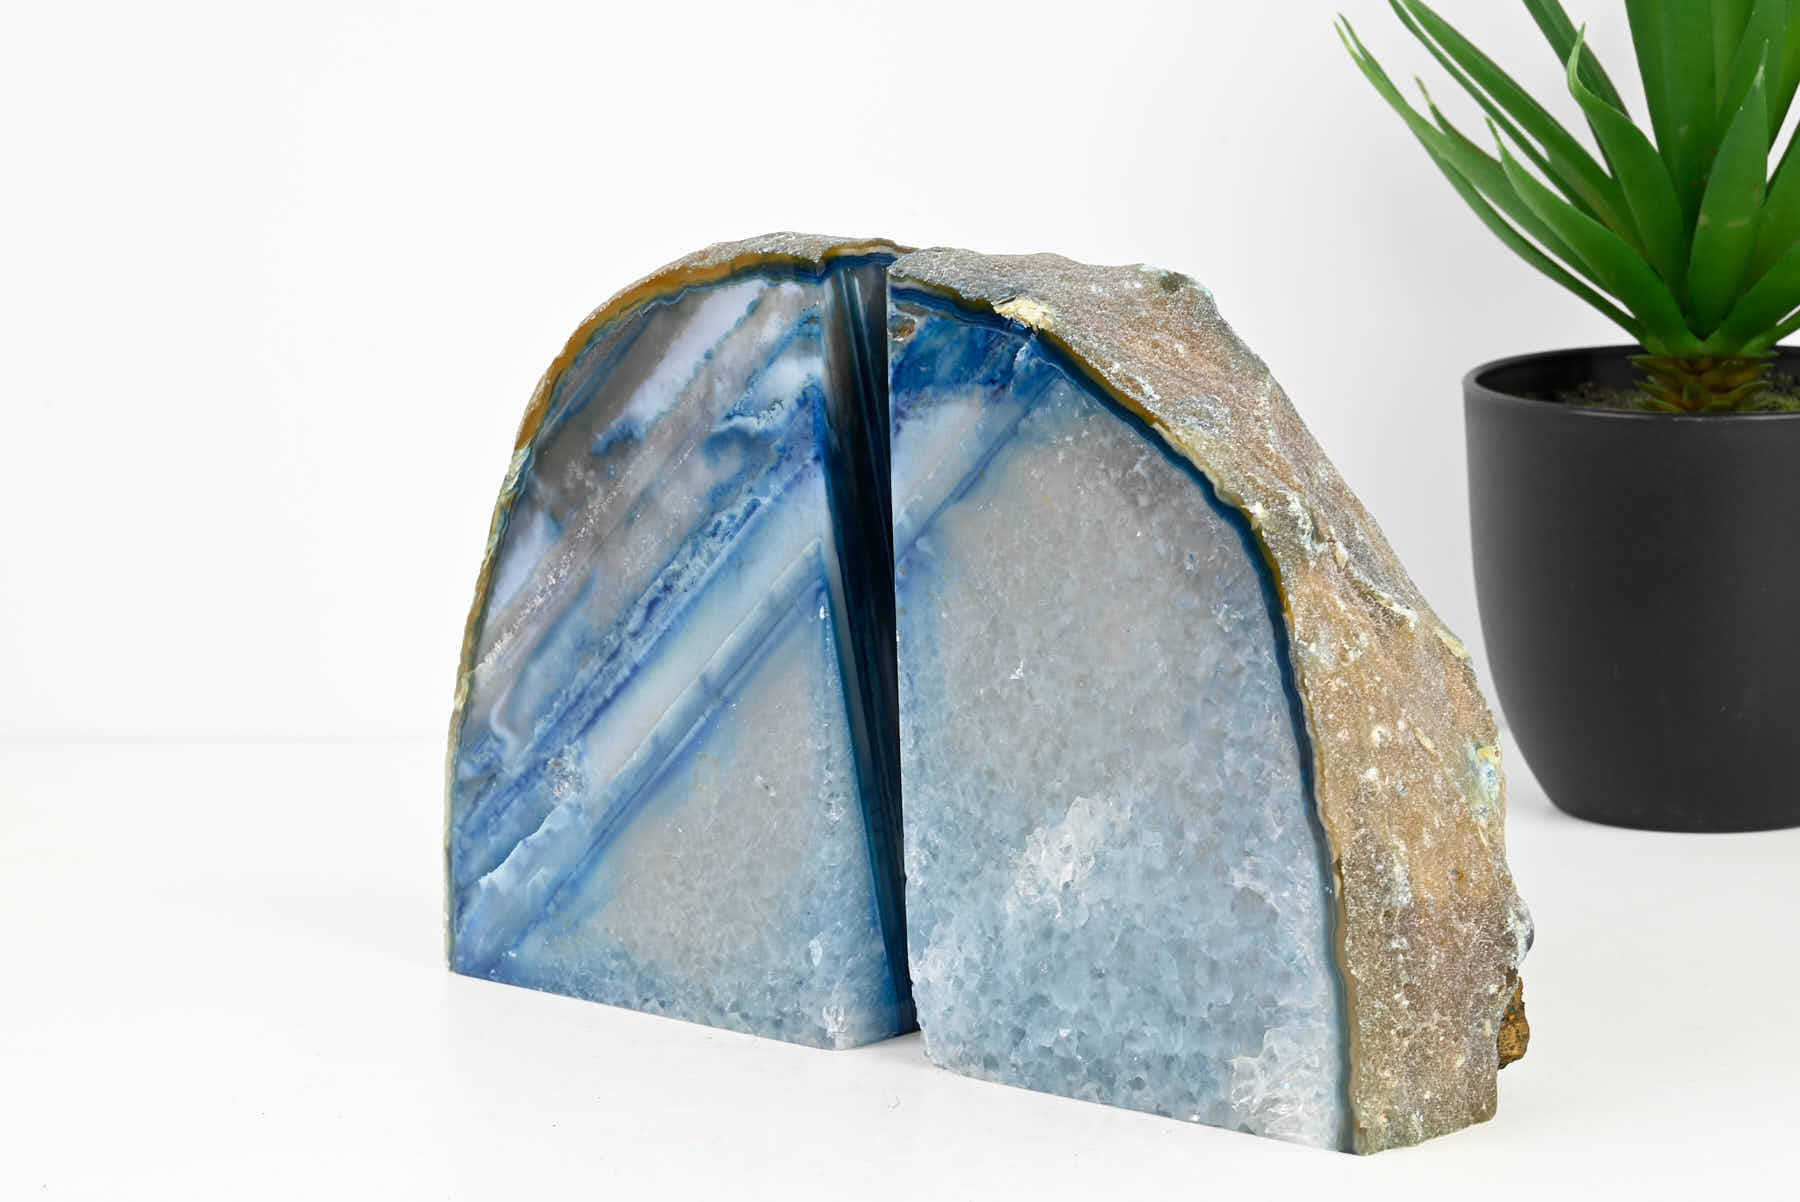 Extra Quality Blue Agate Bookends - 14cm tall - #BOBLUE-12008